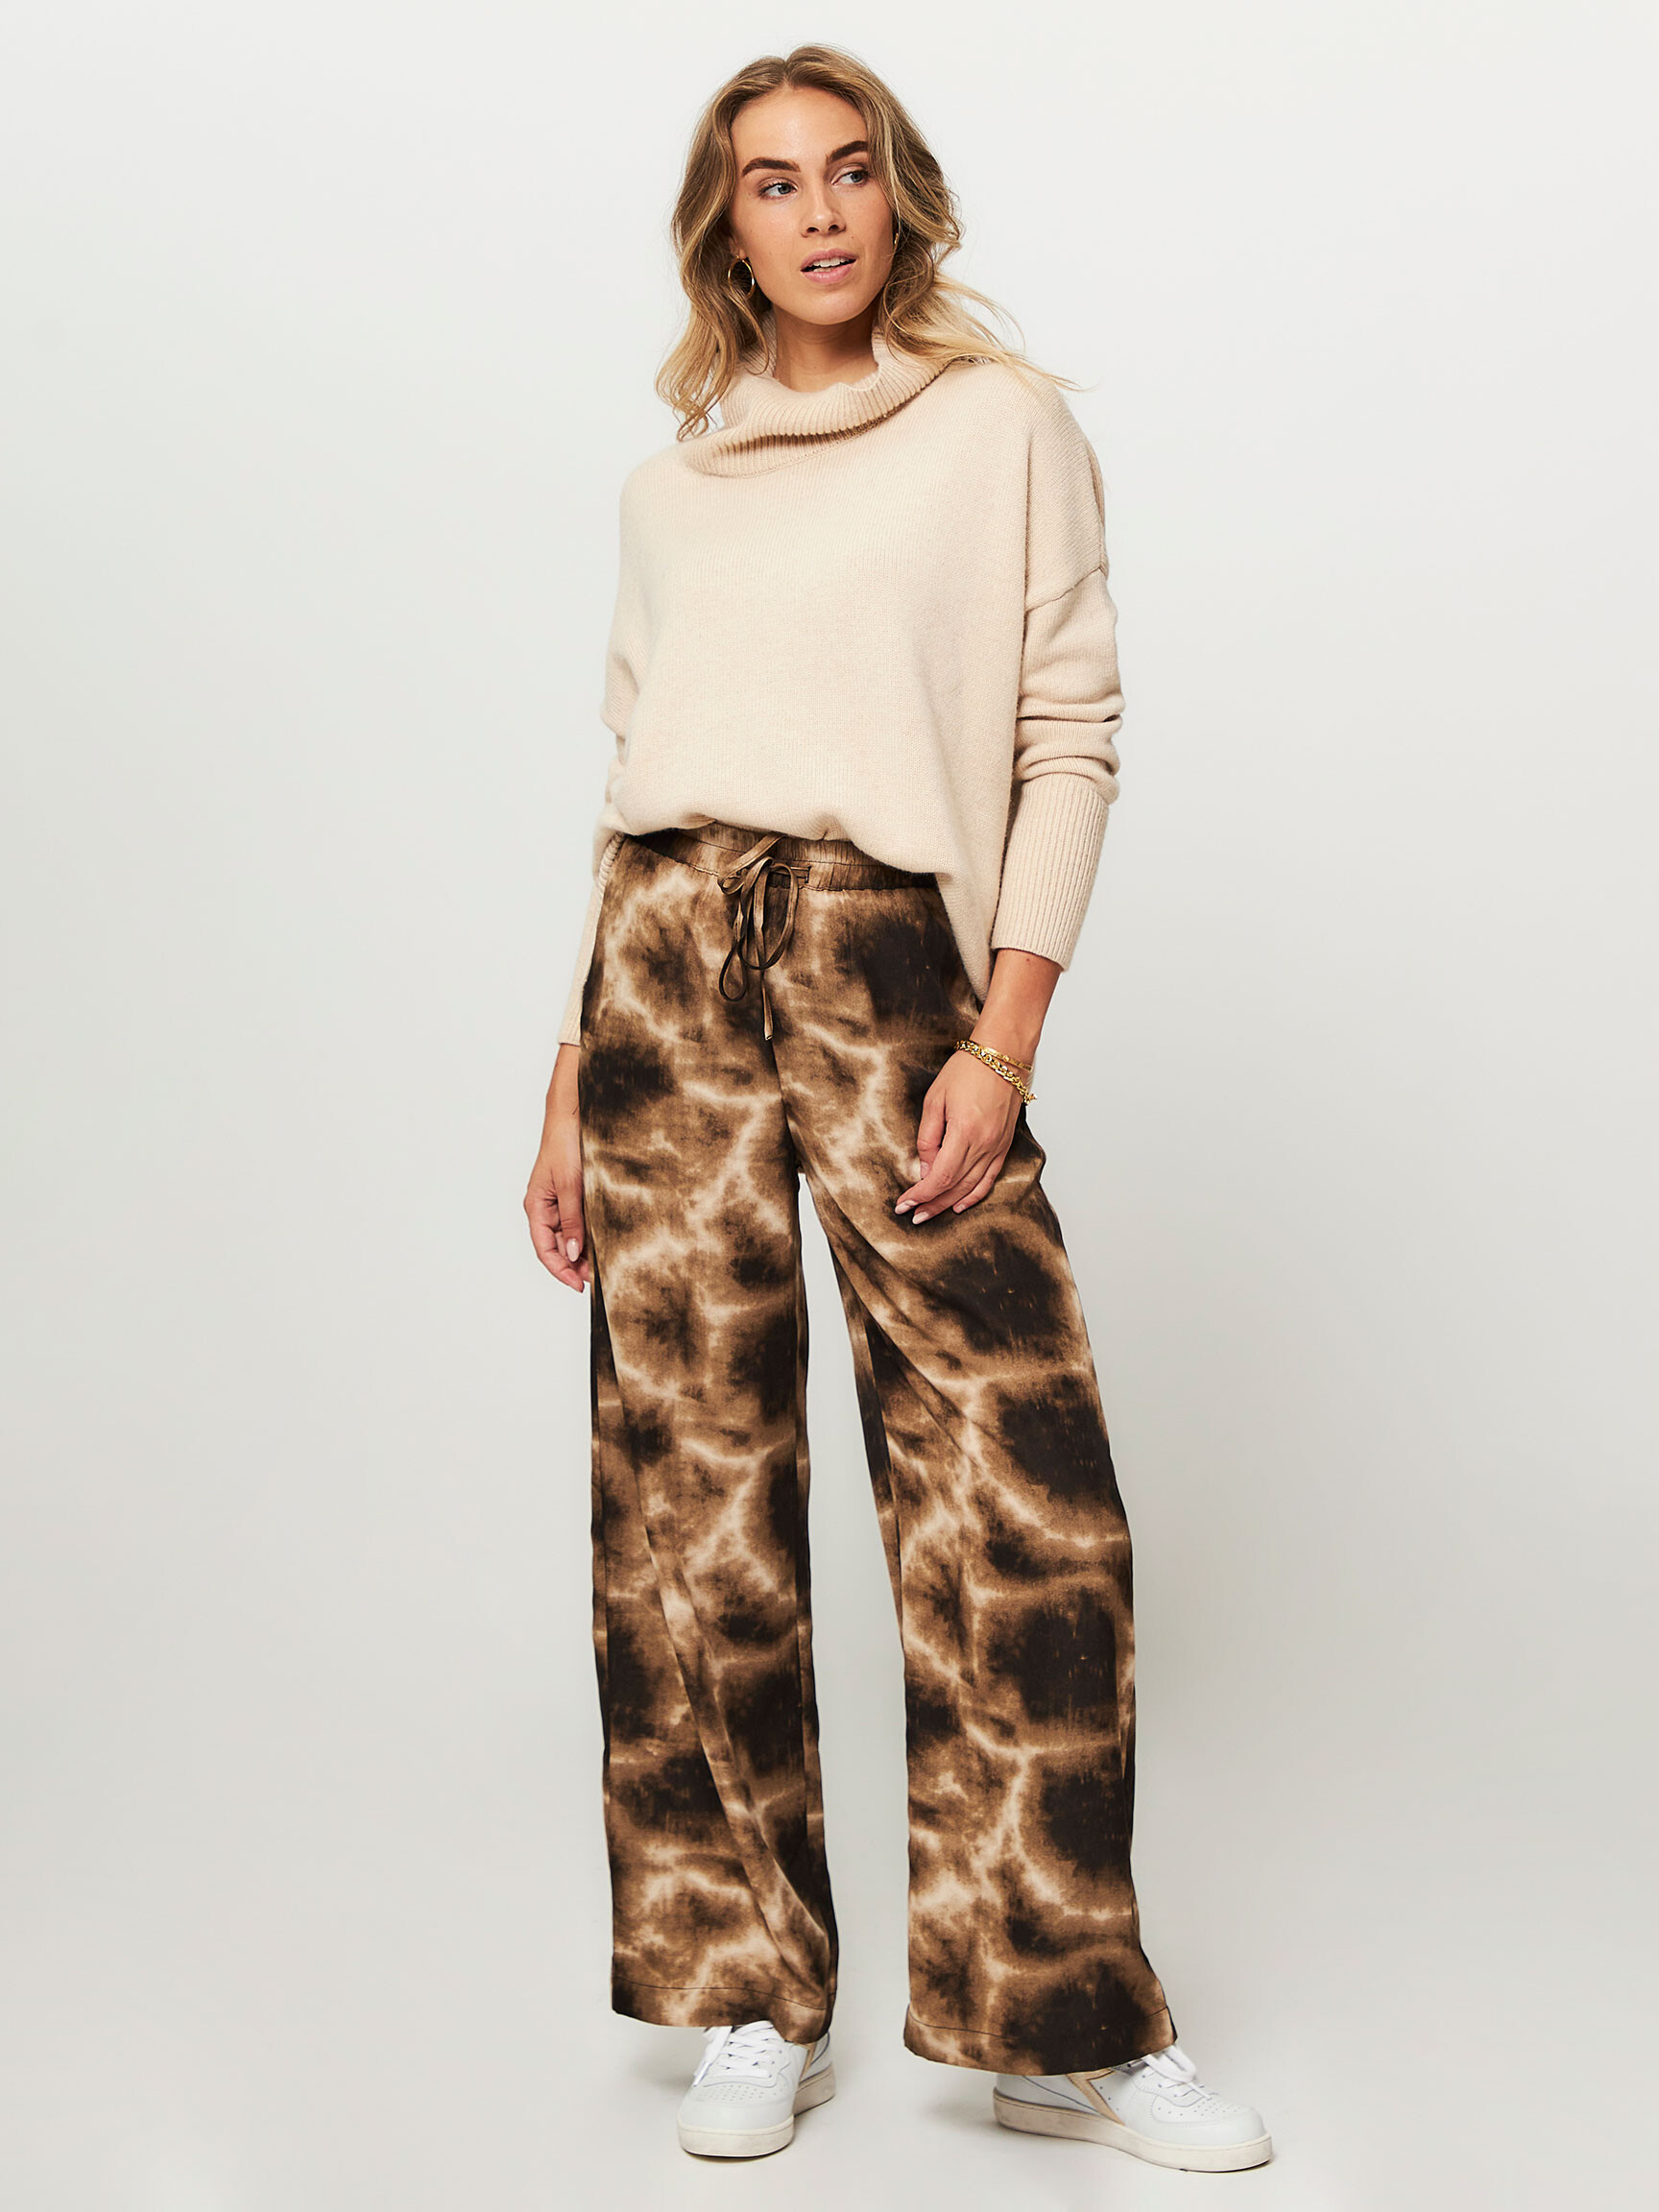 Borneo, woven trousers with print